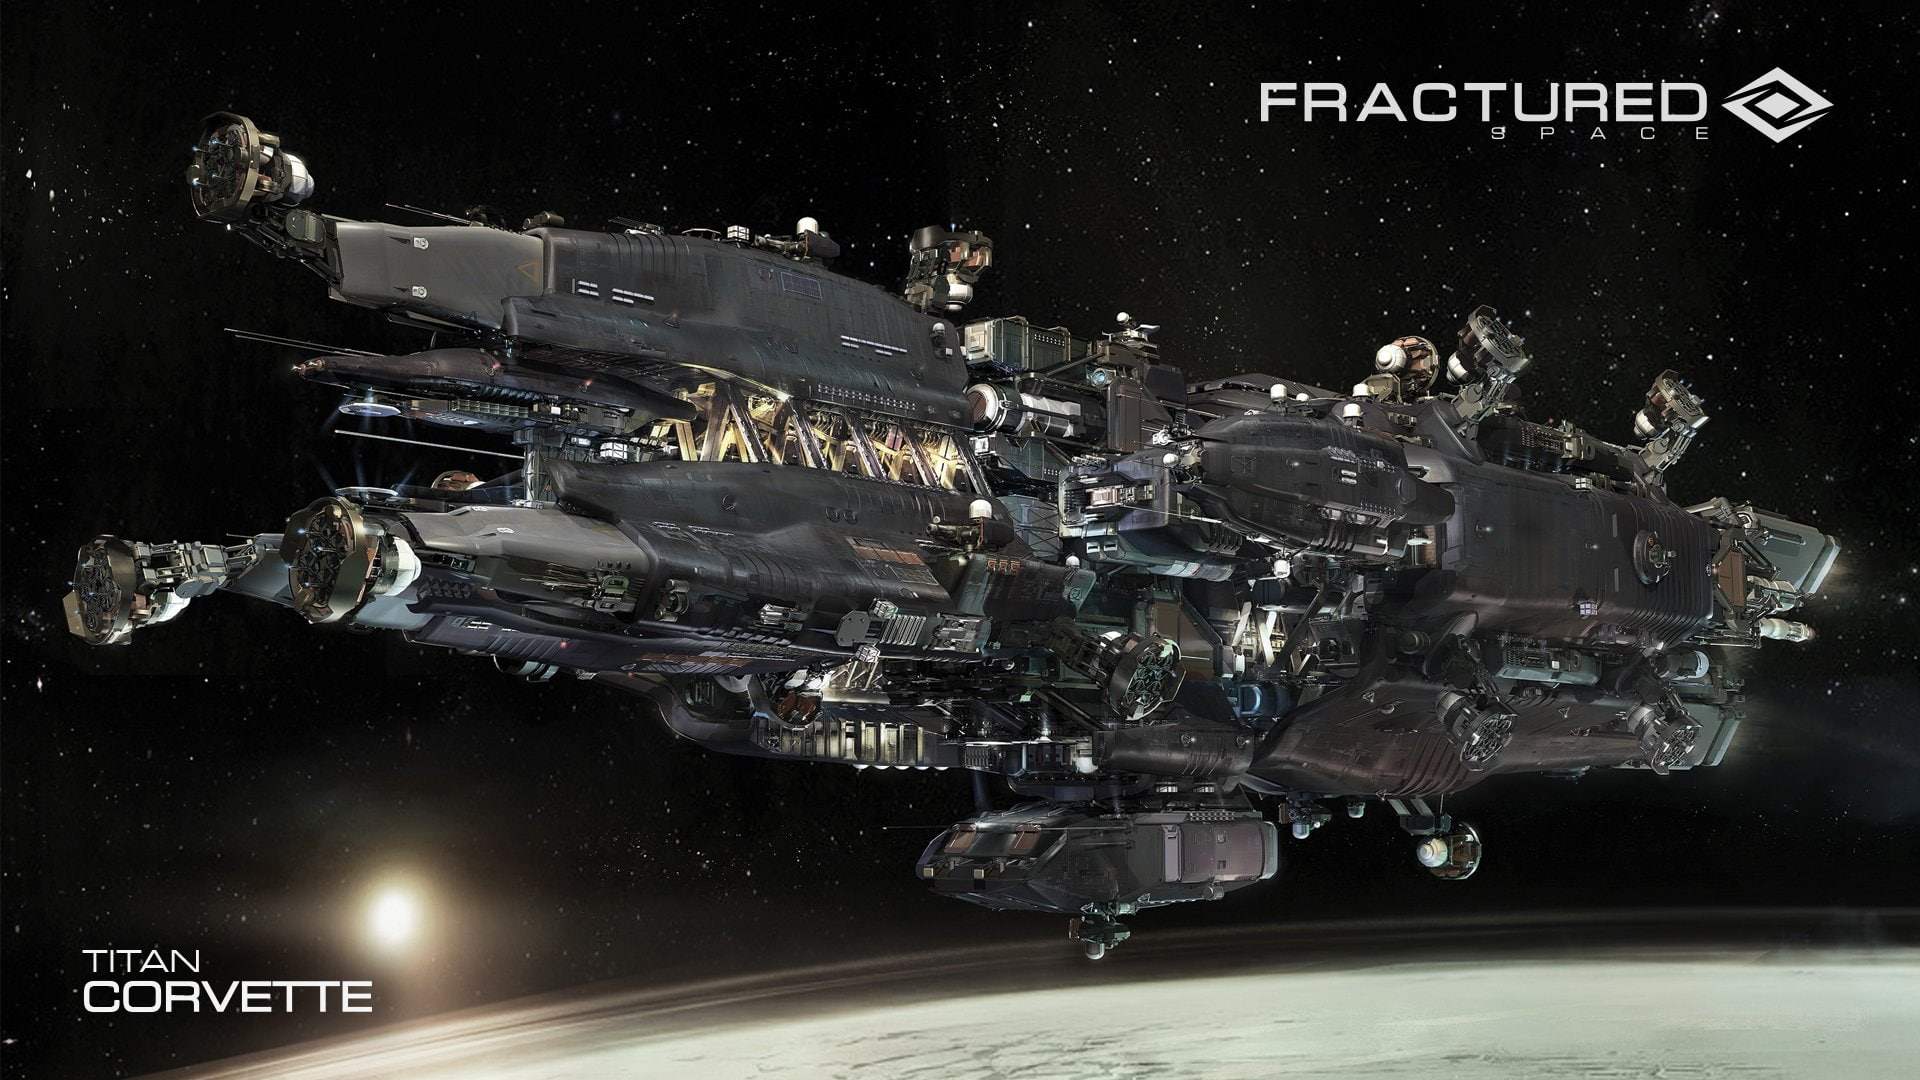 1fspace, action, Combat, fi, Fighting, Fractured, Futuristic